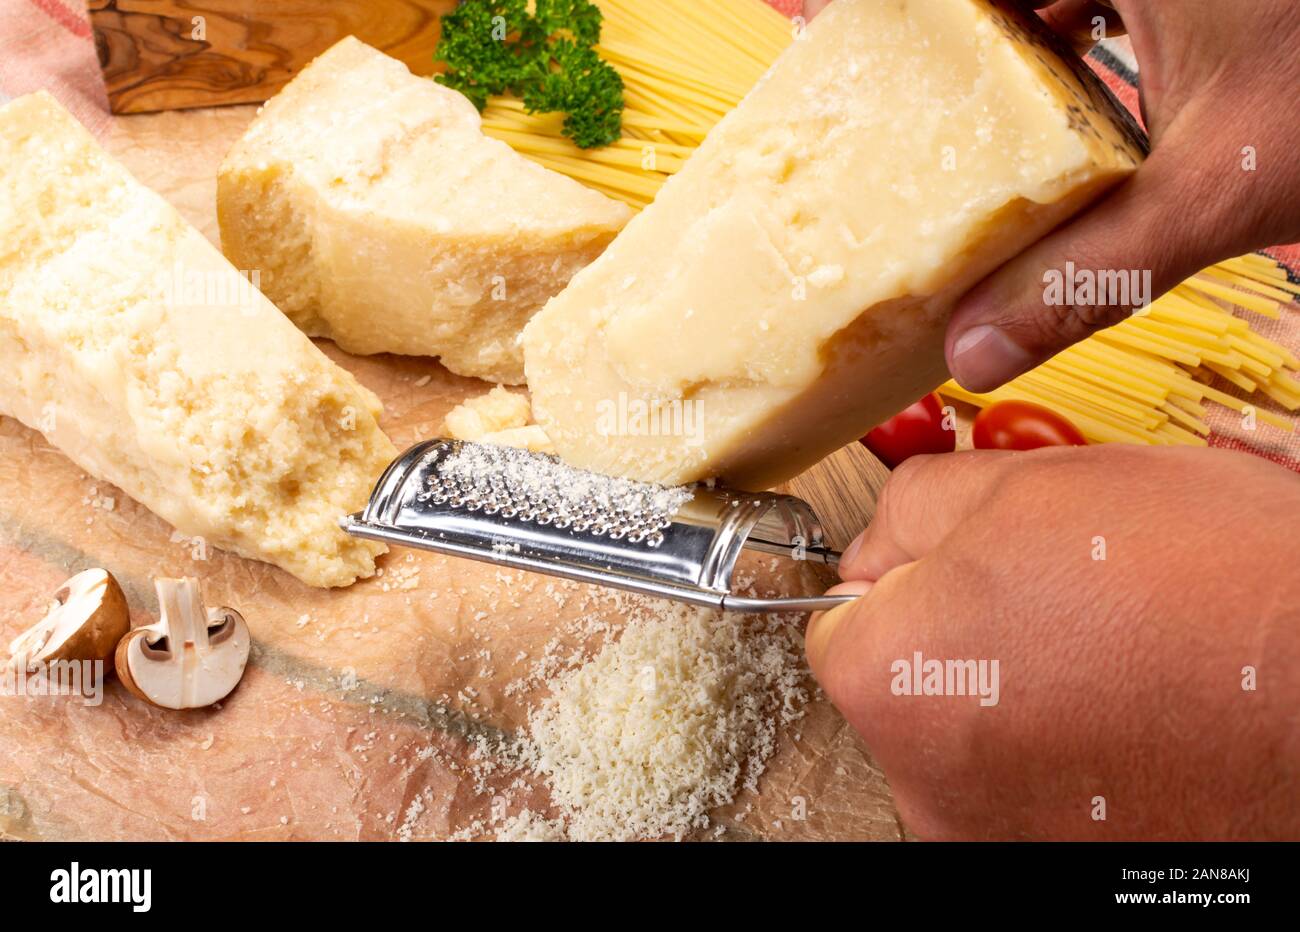 https://c8.alamy.com/comp/2AN8AKJ/man-cooking-with-hard-italian-cheese-grated-parmesan-or-grana-padano-cheese-hand-with-cheese-grater-2AN8AKJ.jpg